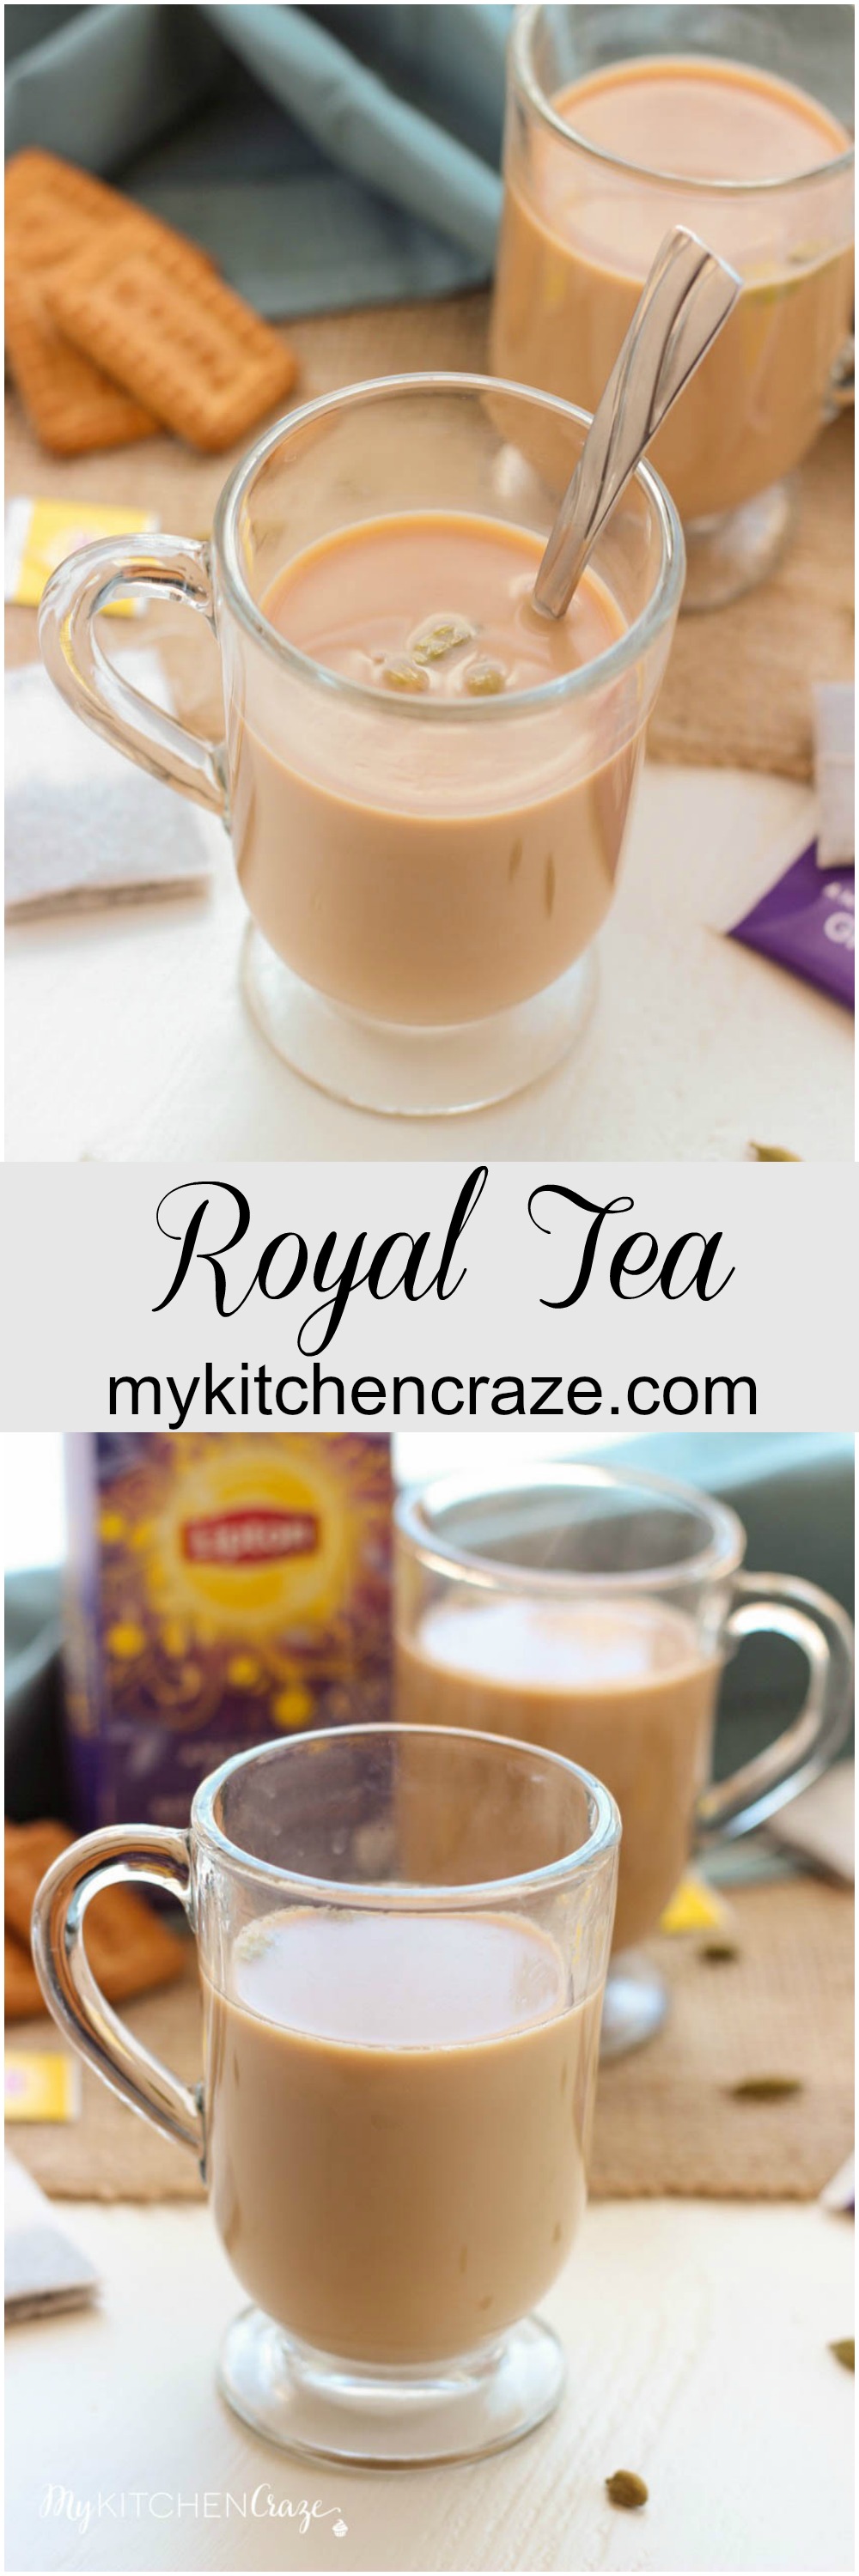 Royal Tea ~ mykitchencraze.com ~ Royal Tea is one of those teas that will leave you all warm and fuzzy inside. Plus it tastes delicious!